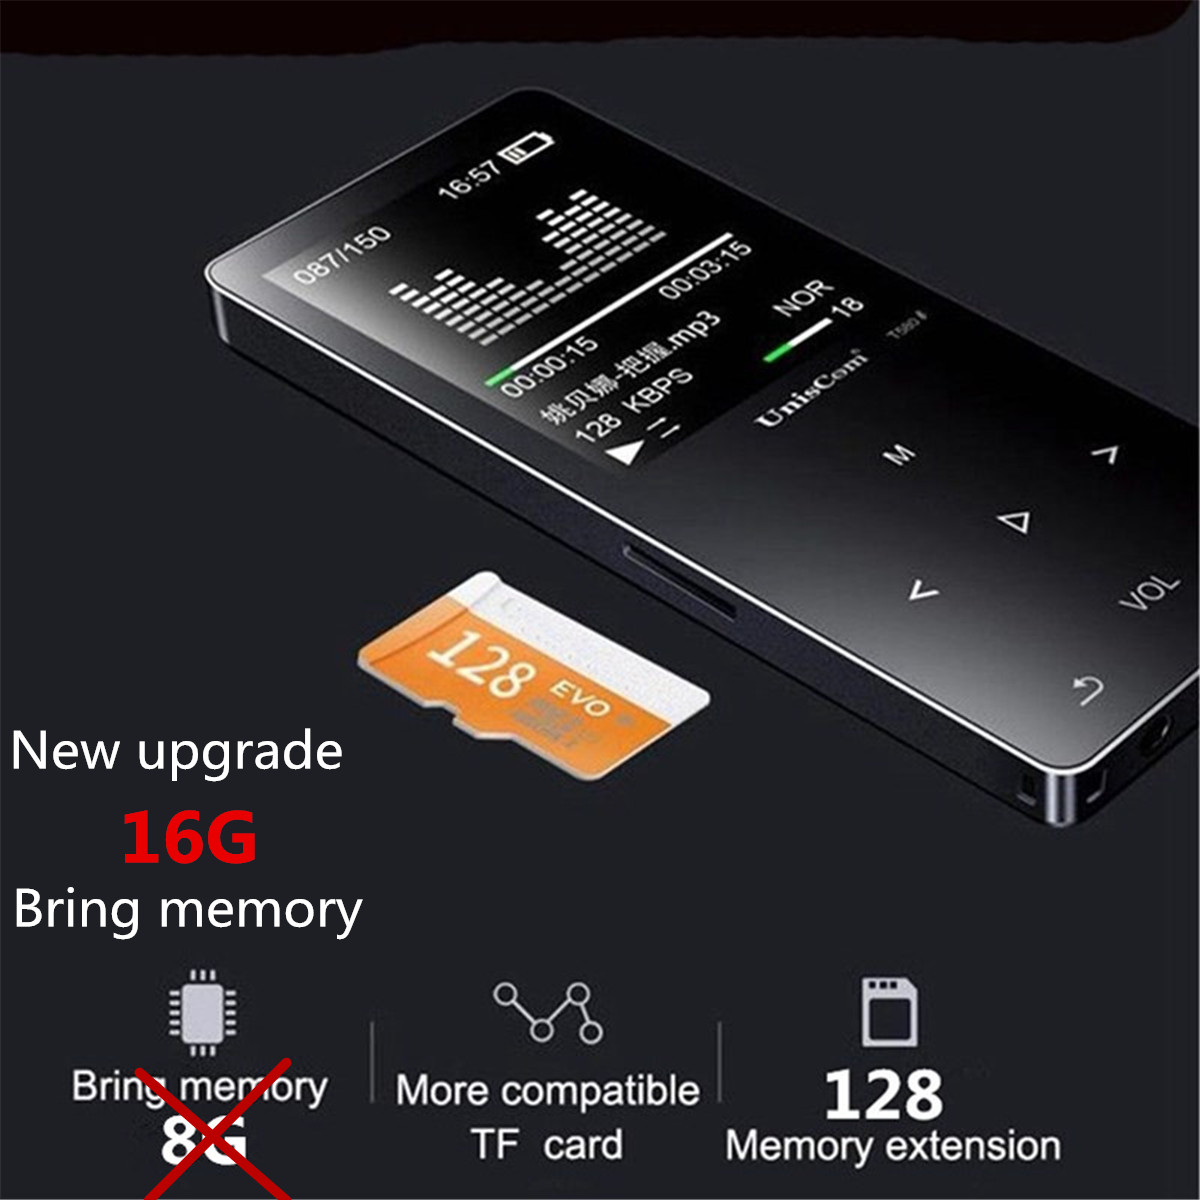 Uniscom 8G 1.8 Inch Screen bluetooth Lossless HIFI MP3 Music Player Support A-B Repeat Voice Record 23